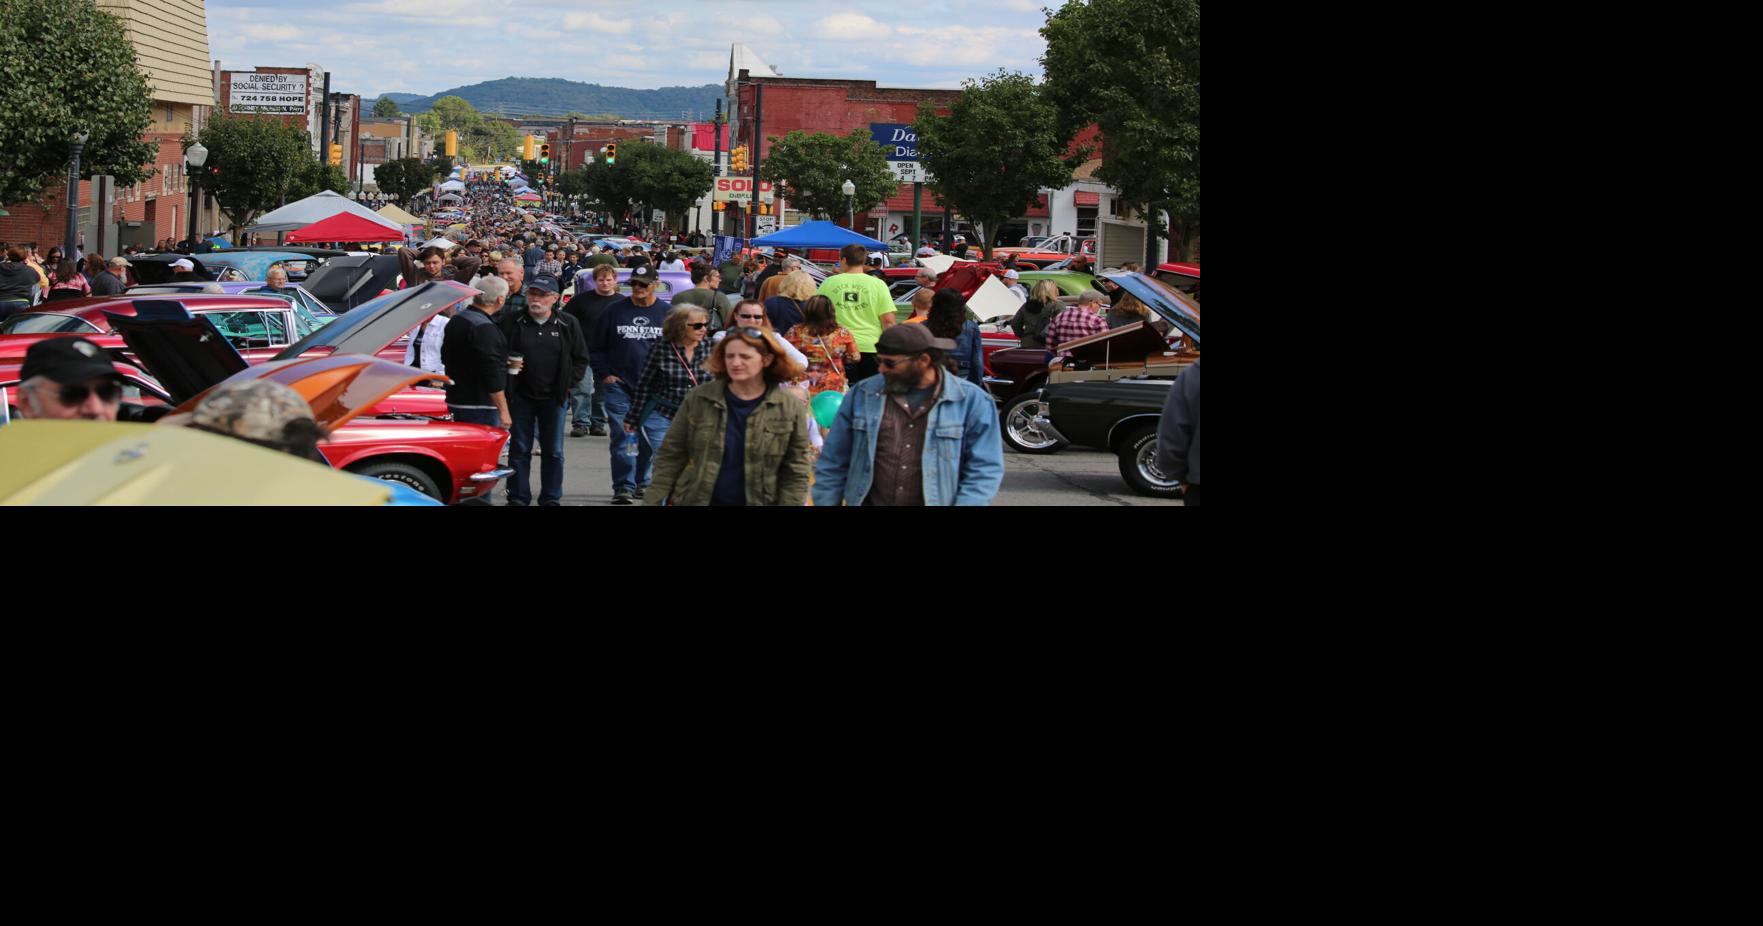 Things to do this weekend Ellwood festival to attract hundreds of cars